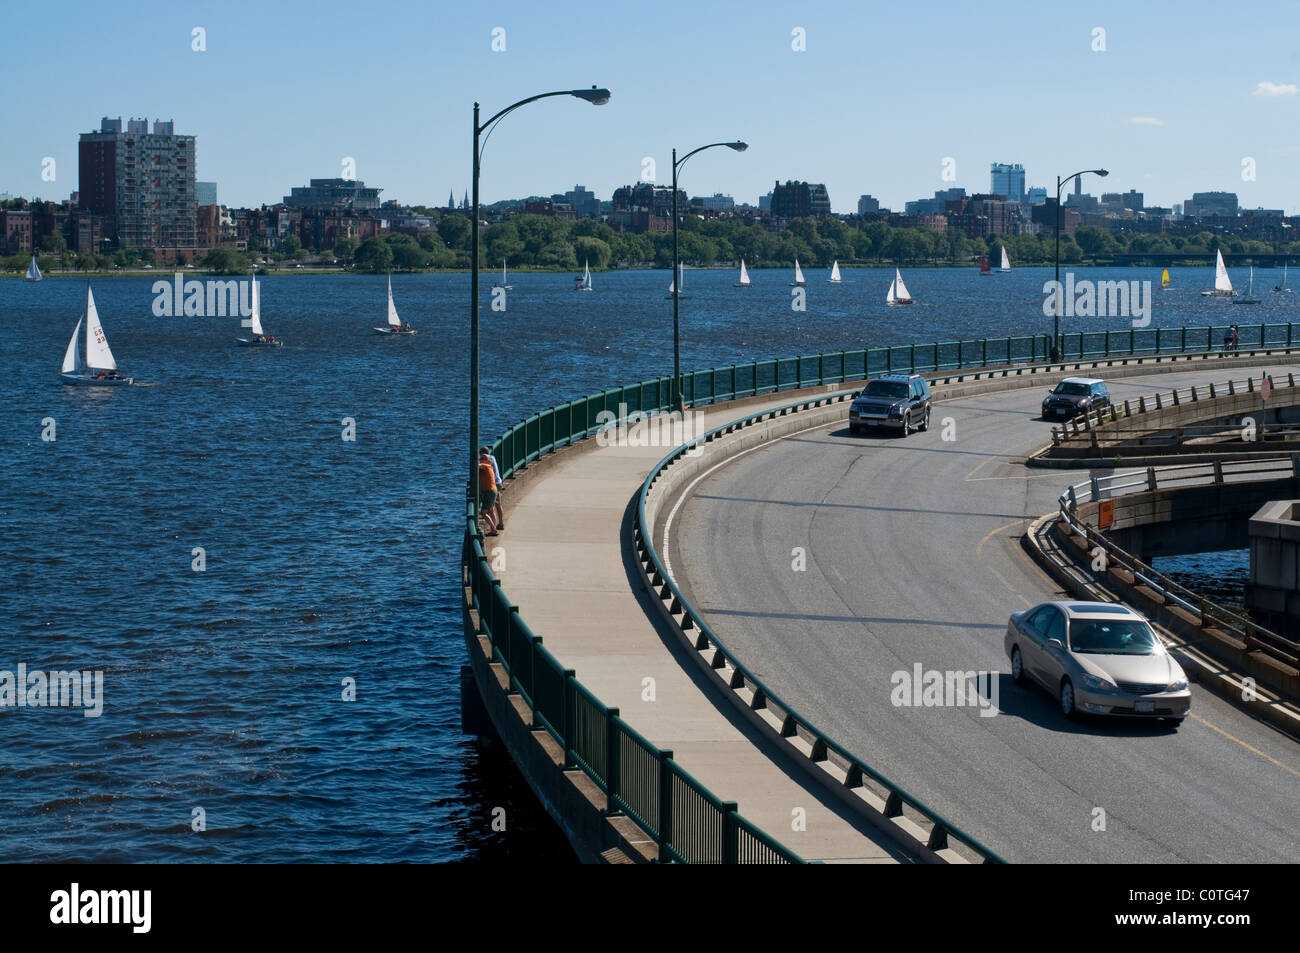 A stretch of road in Boston MA. on the Charles river with sail boats in the background. Stock Photo